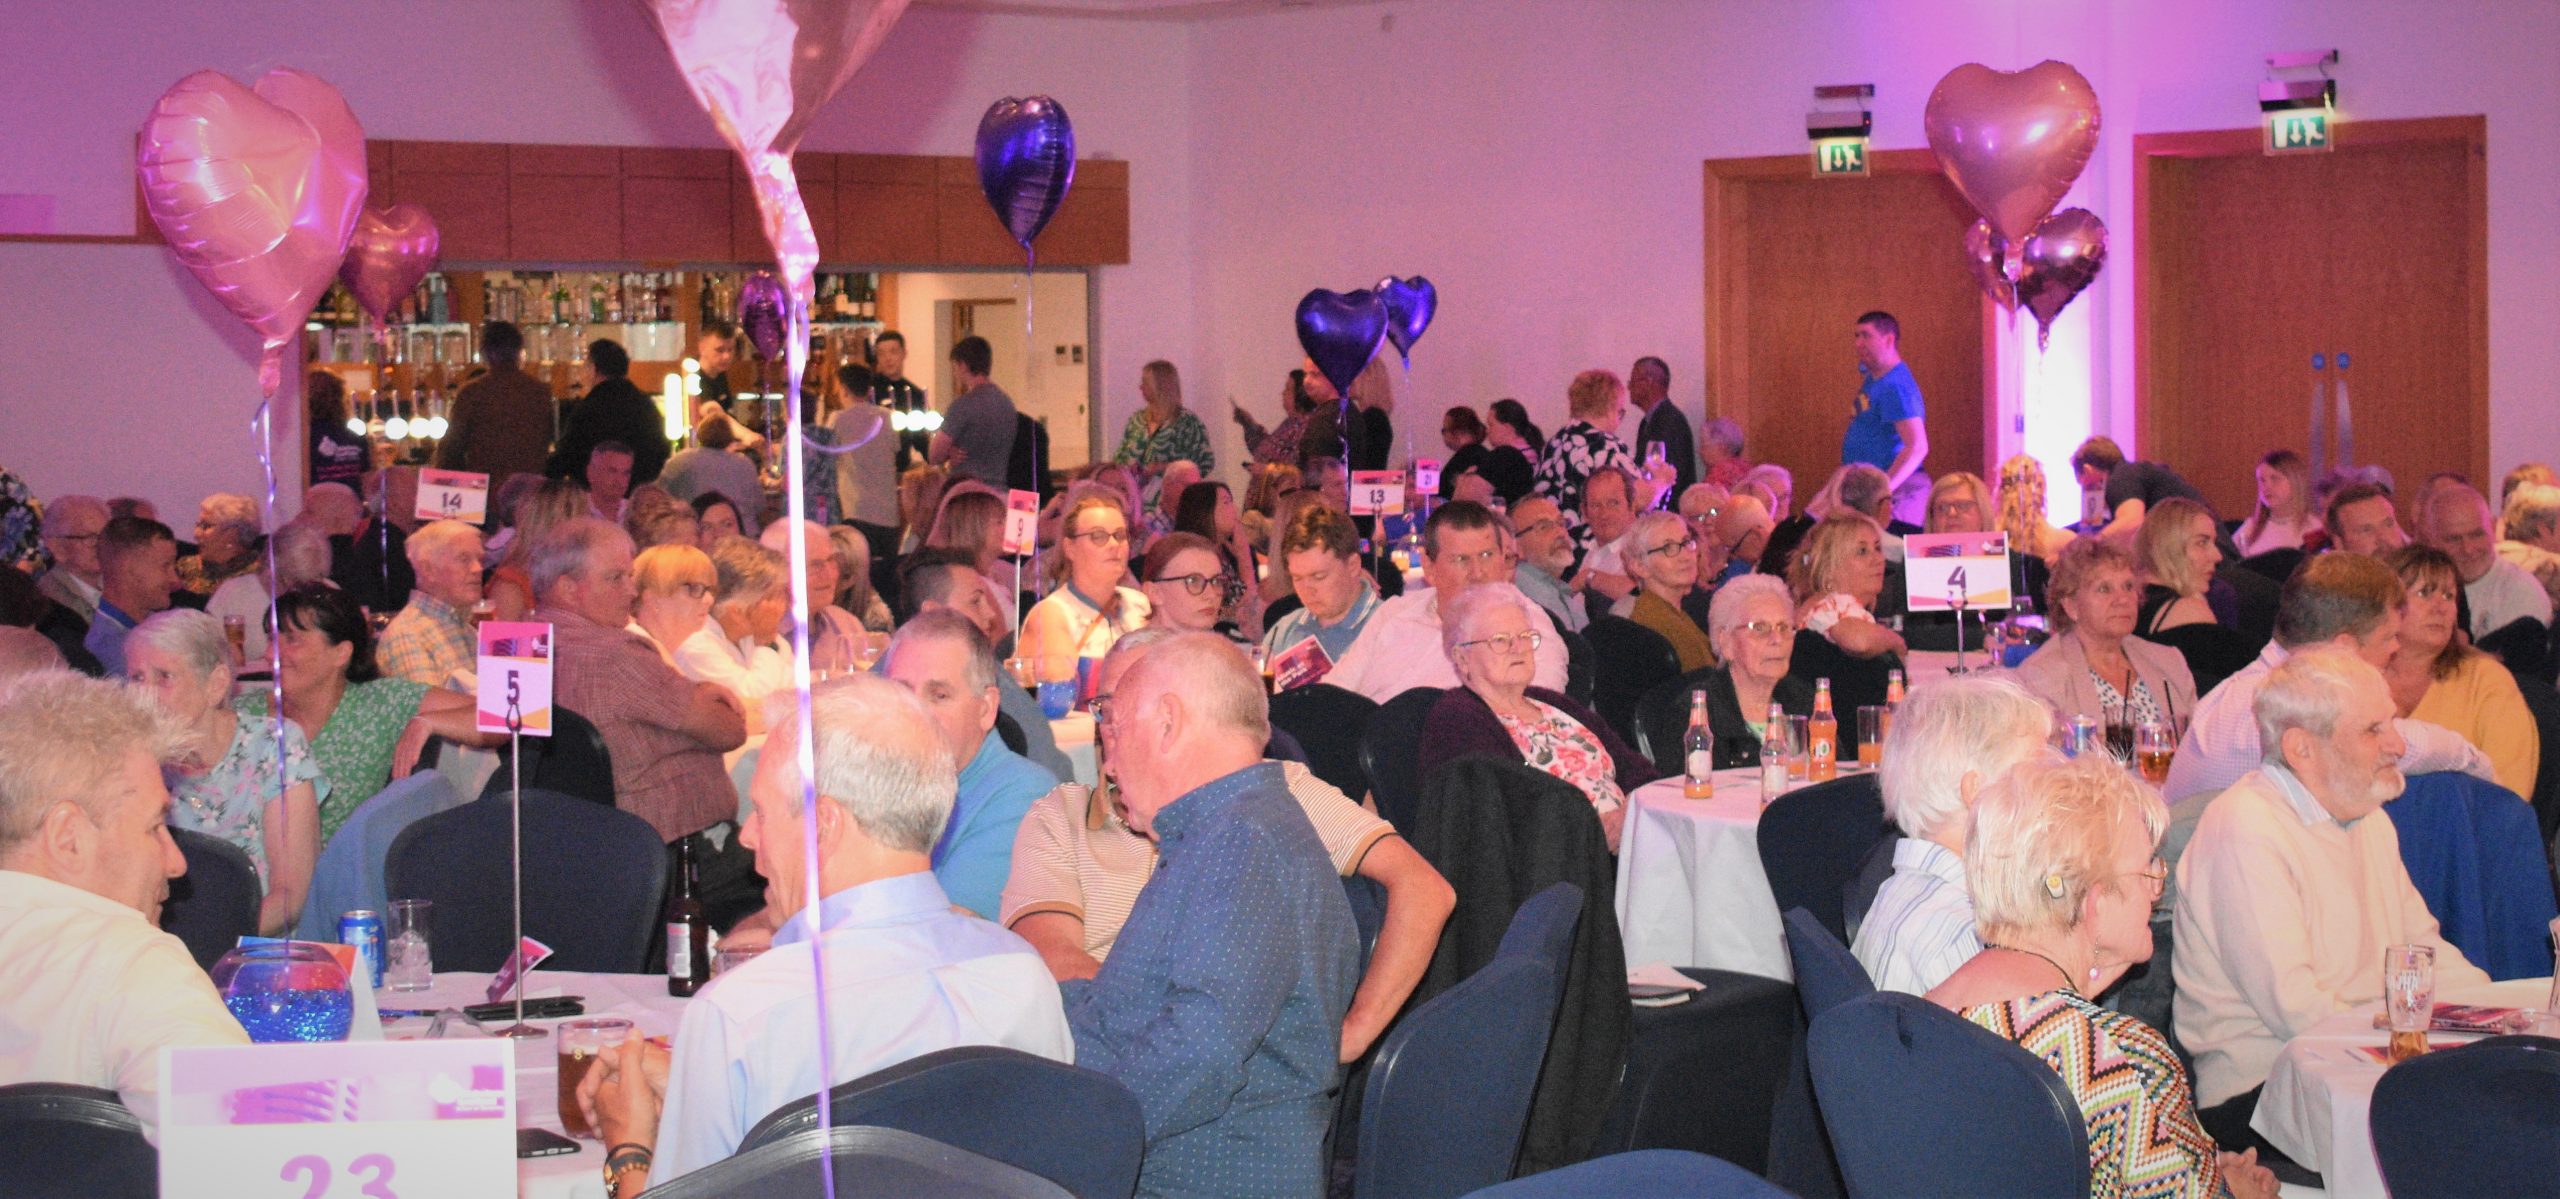 Attendees at the 'Music at the Park' concert at Kilmarnock's Park Hotel